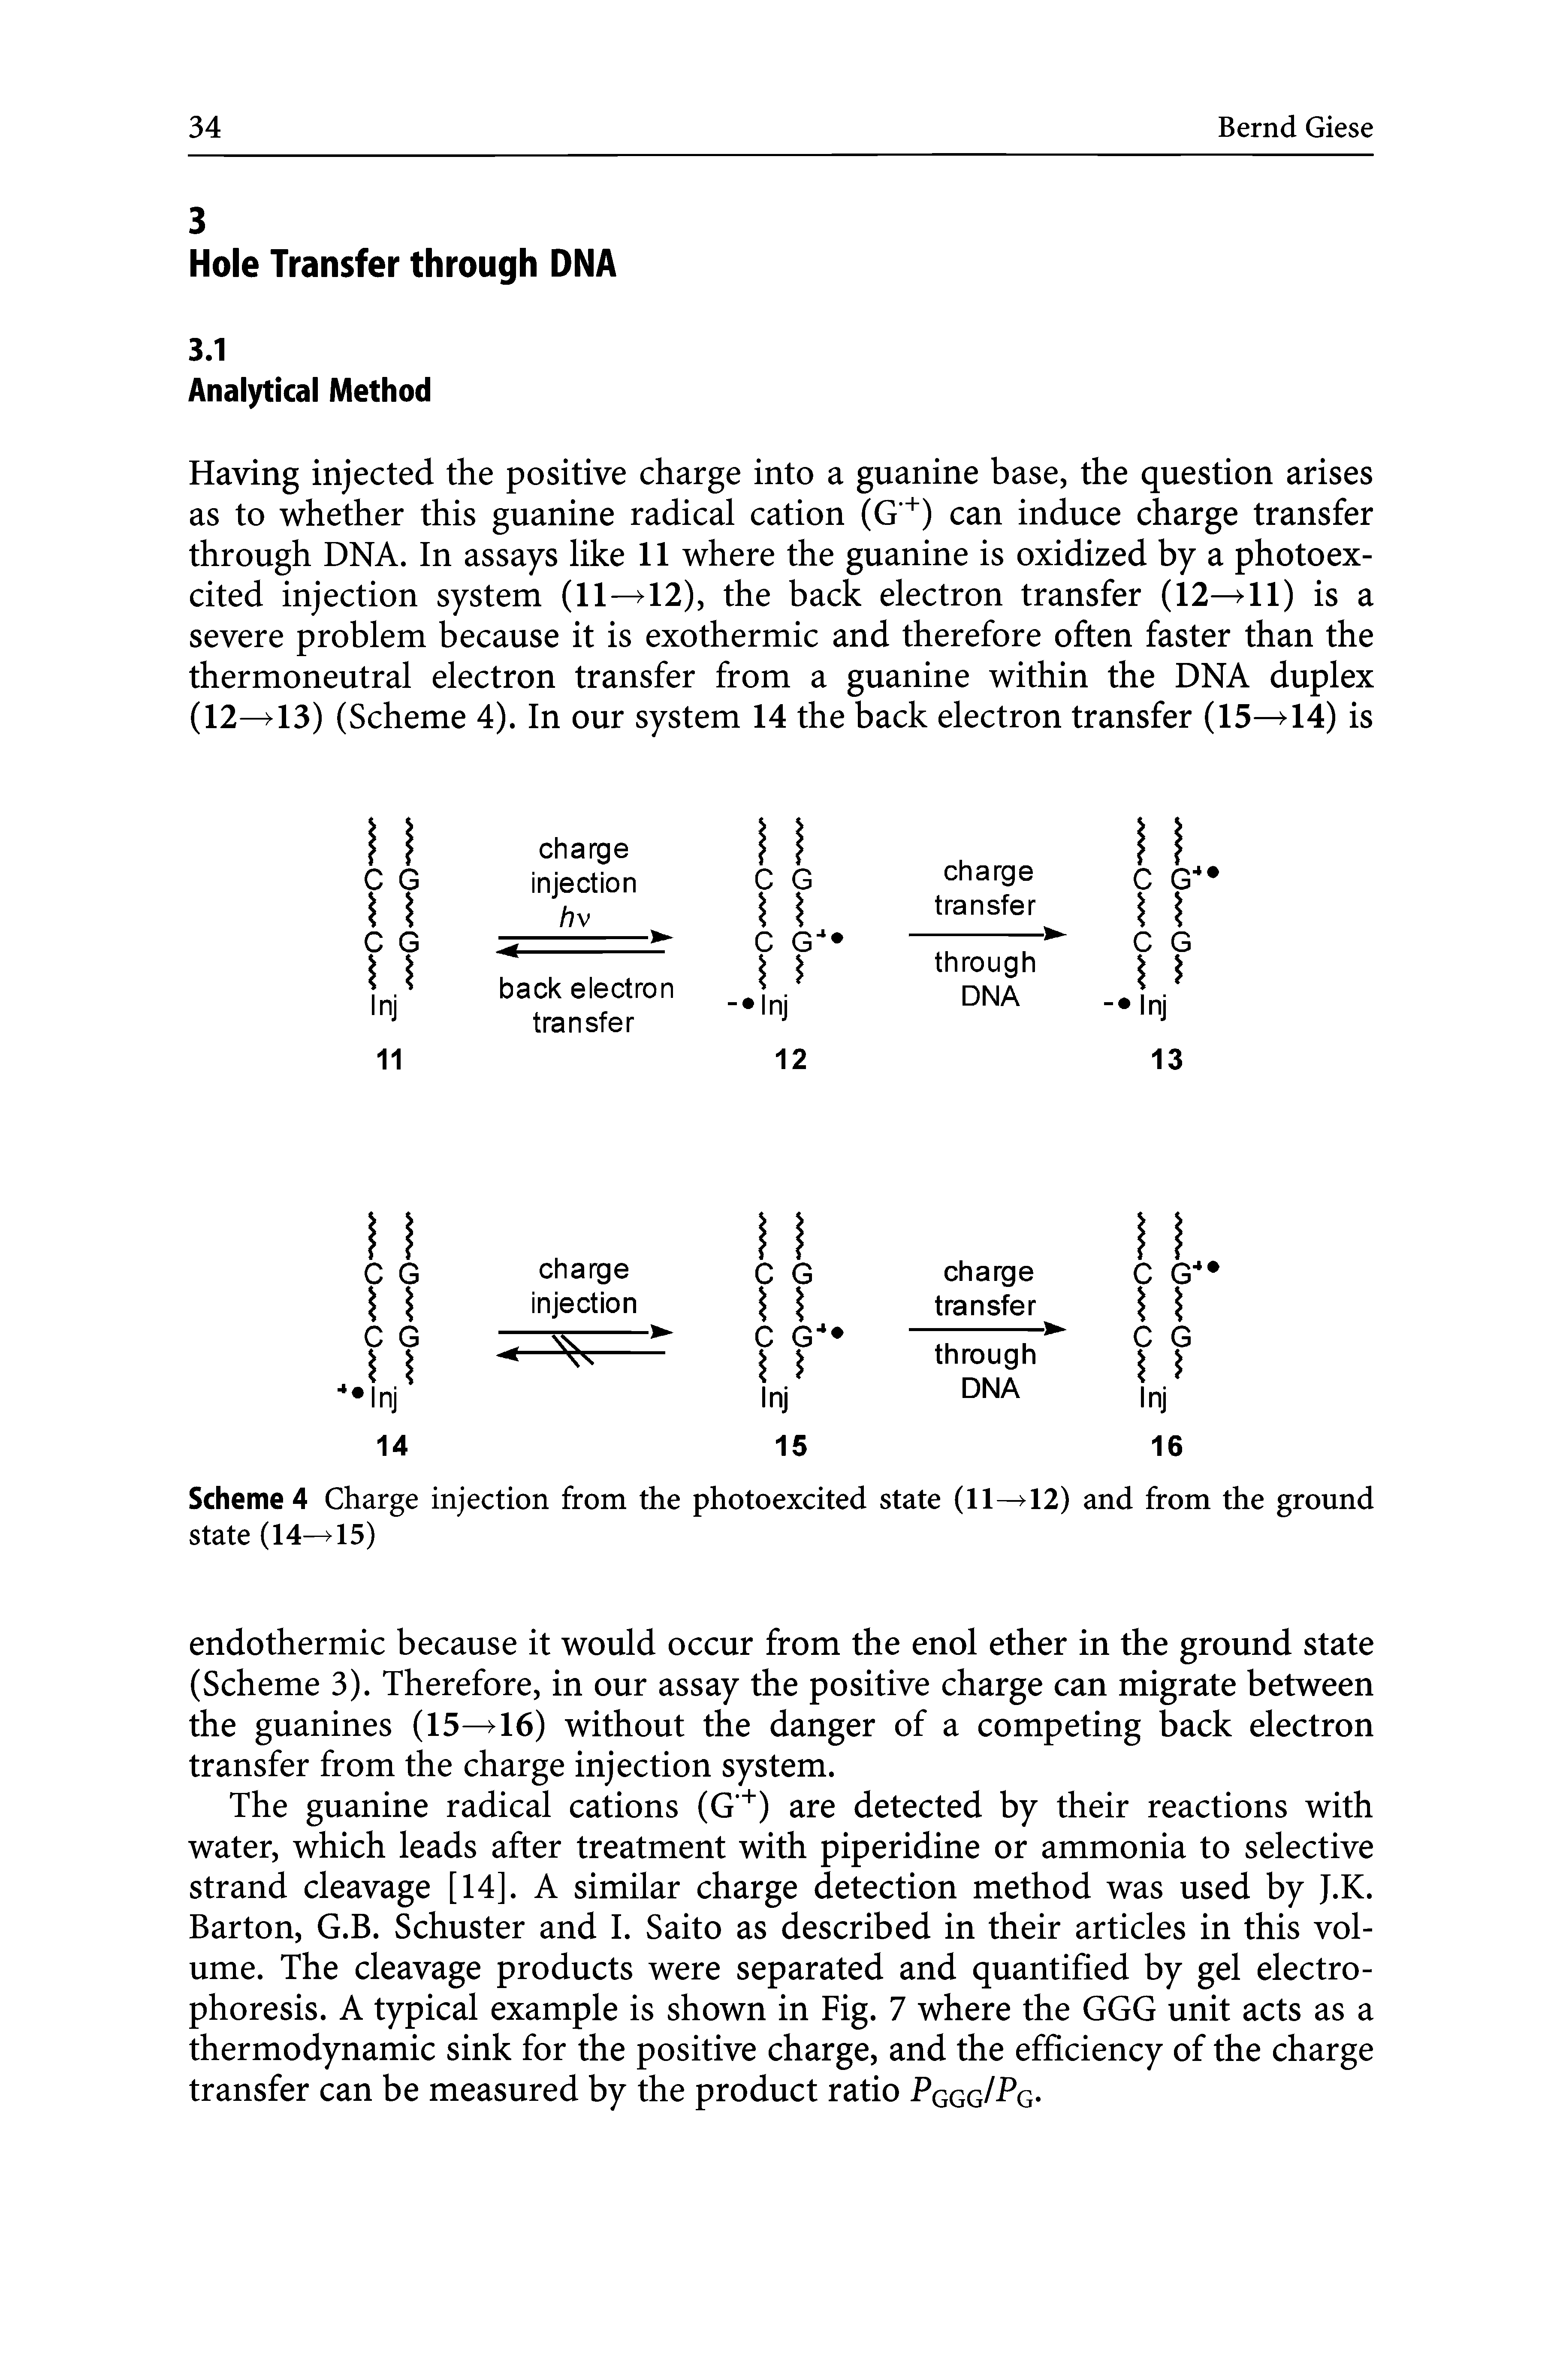 Scheme 4 Charge injection from the photoexcited state (11— 12) and from the ground state (14—>15)...